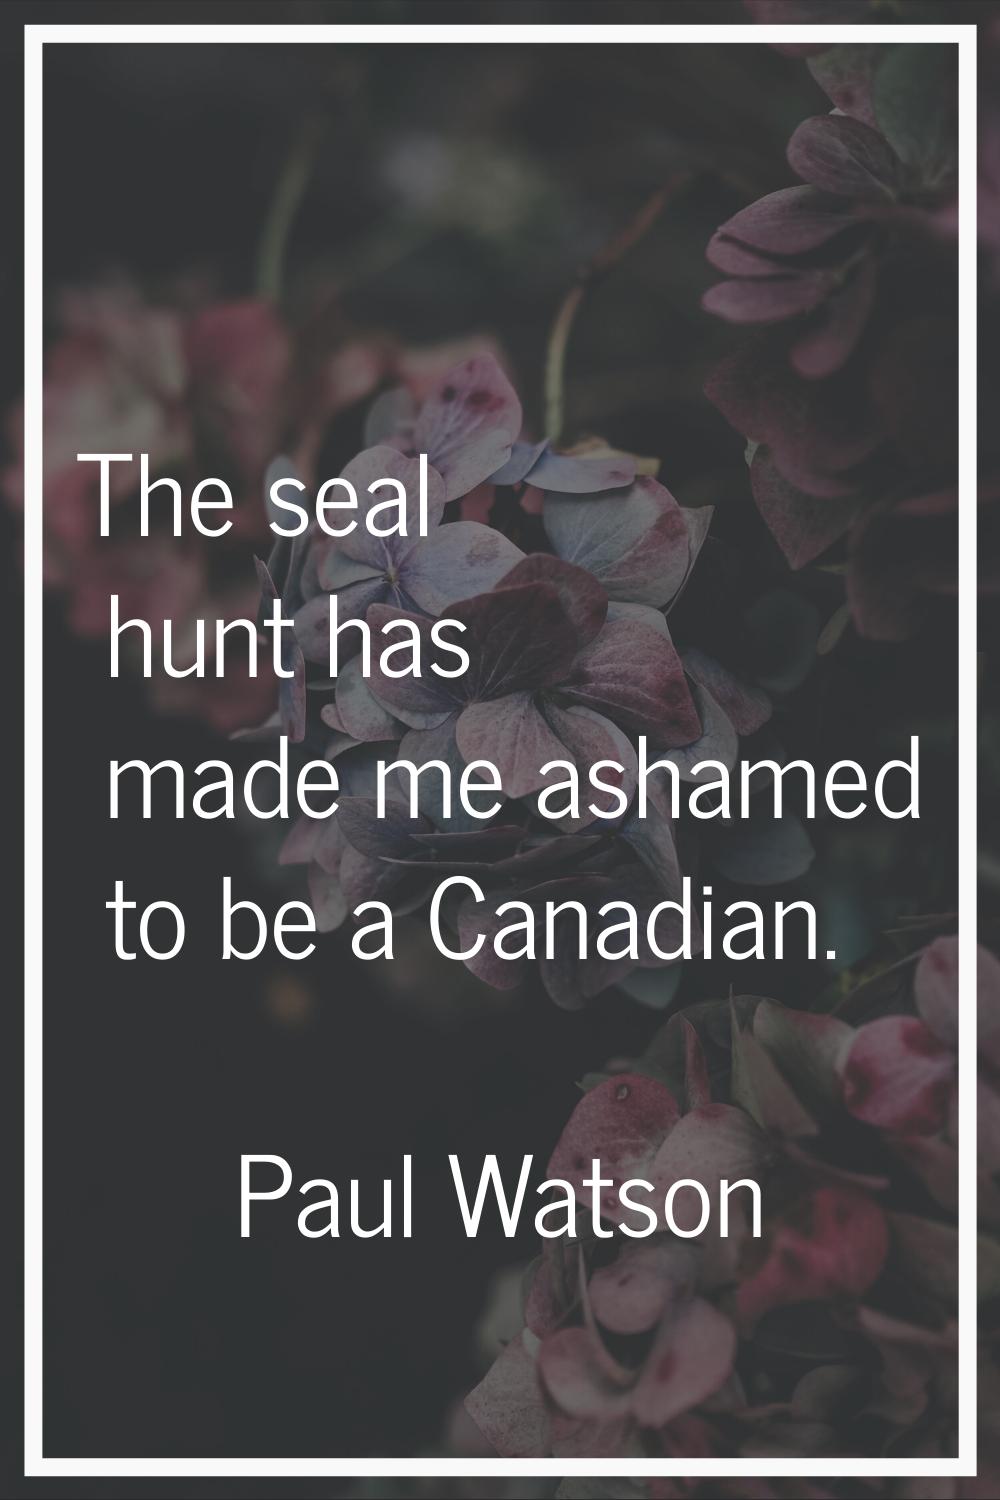 The seal hunt has made me ashamed to be a Canadian.